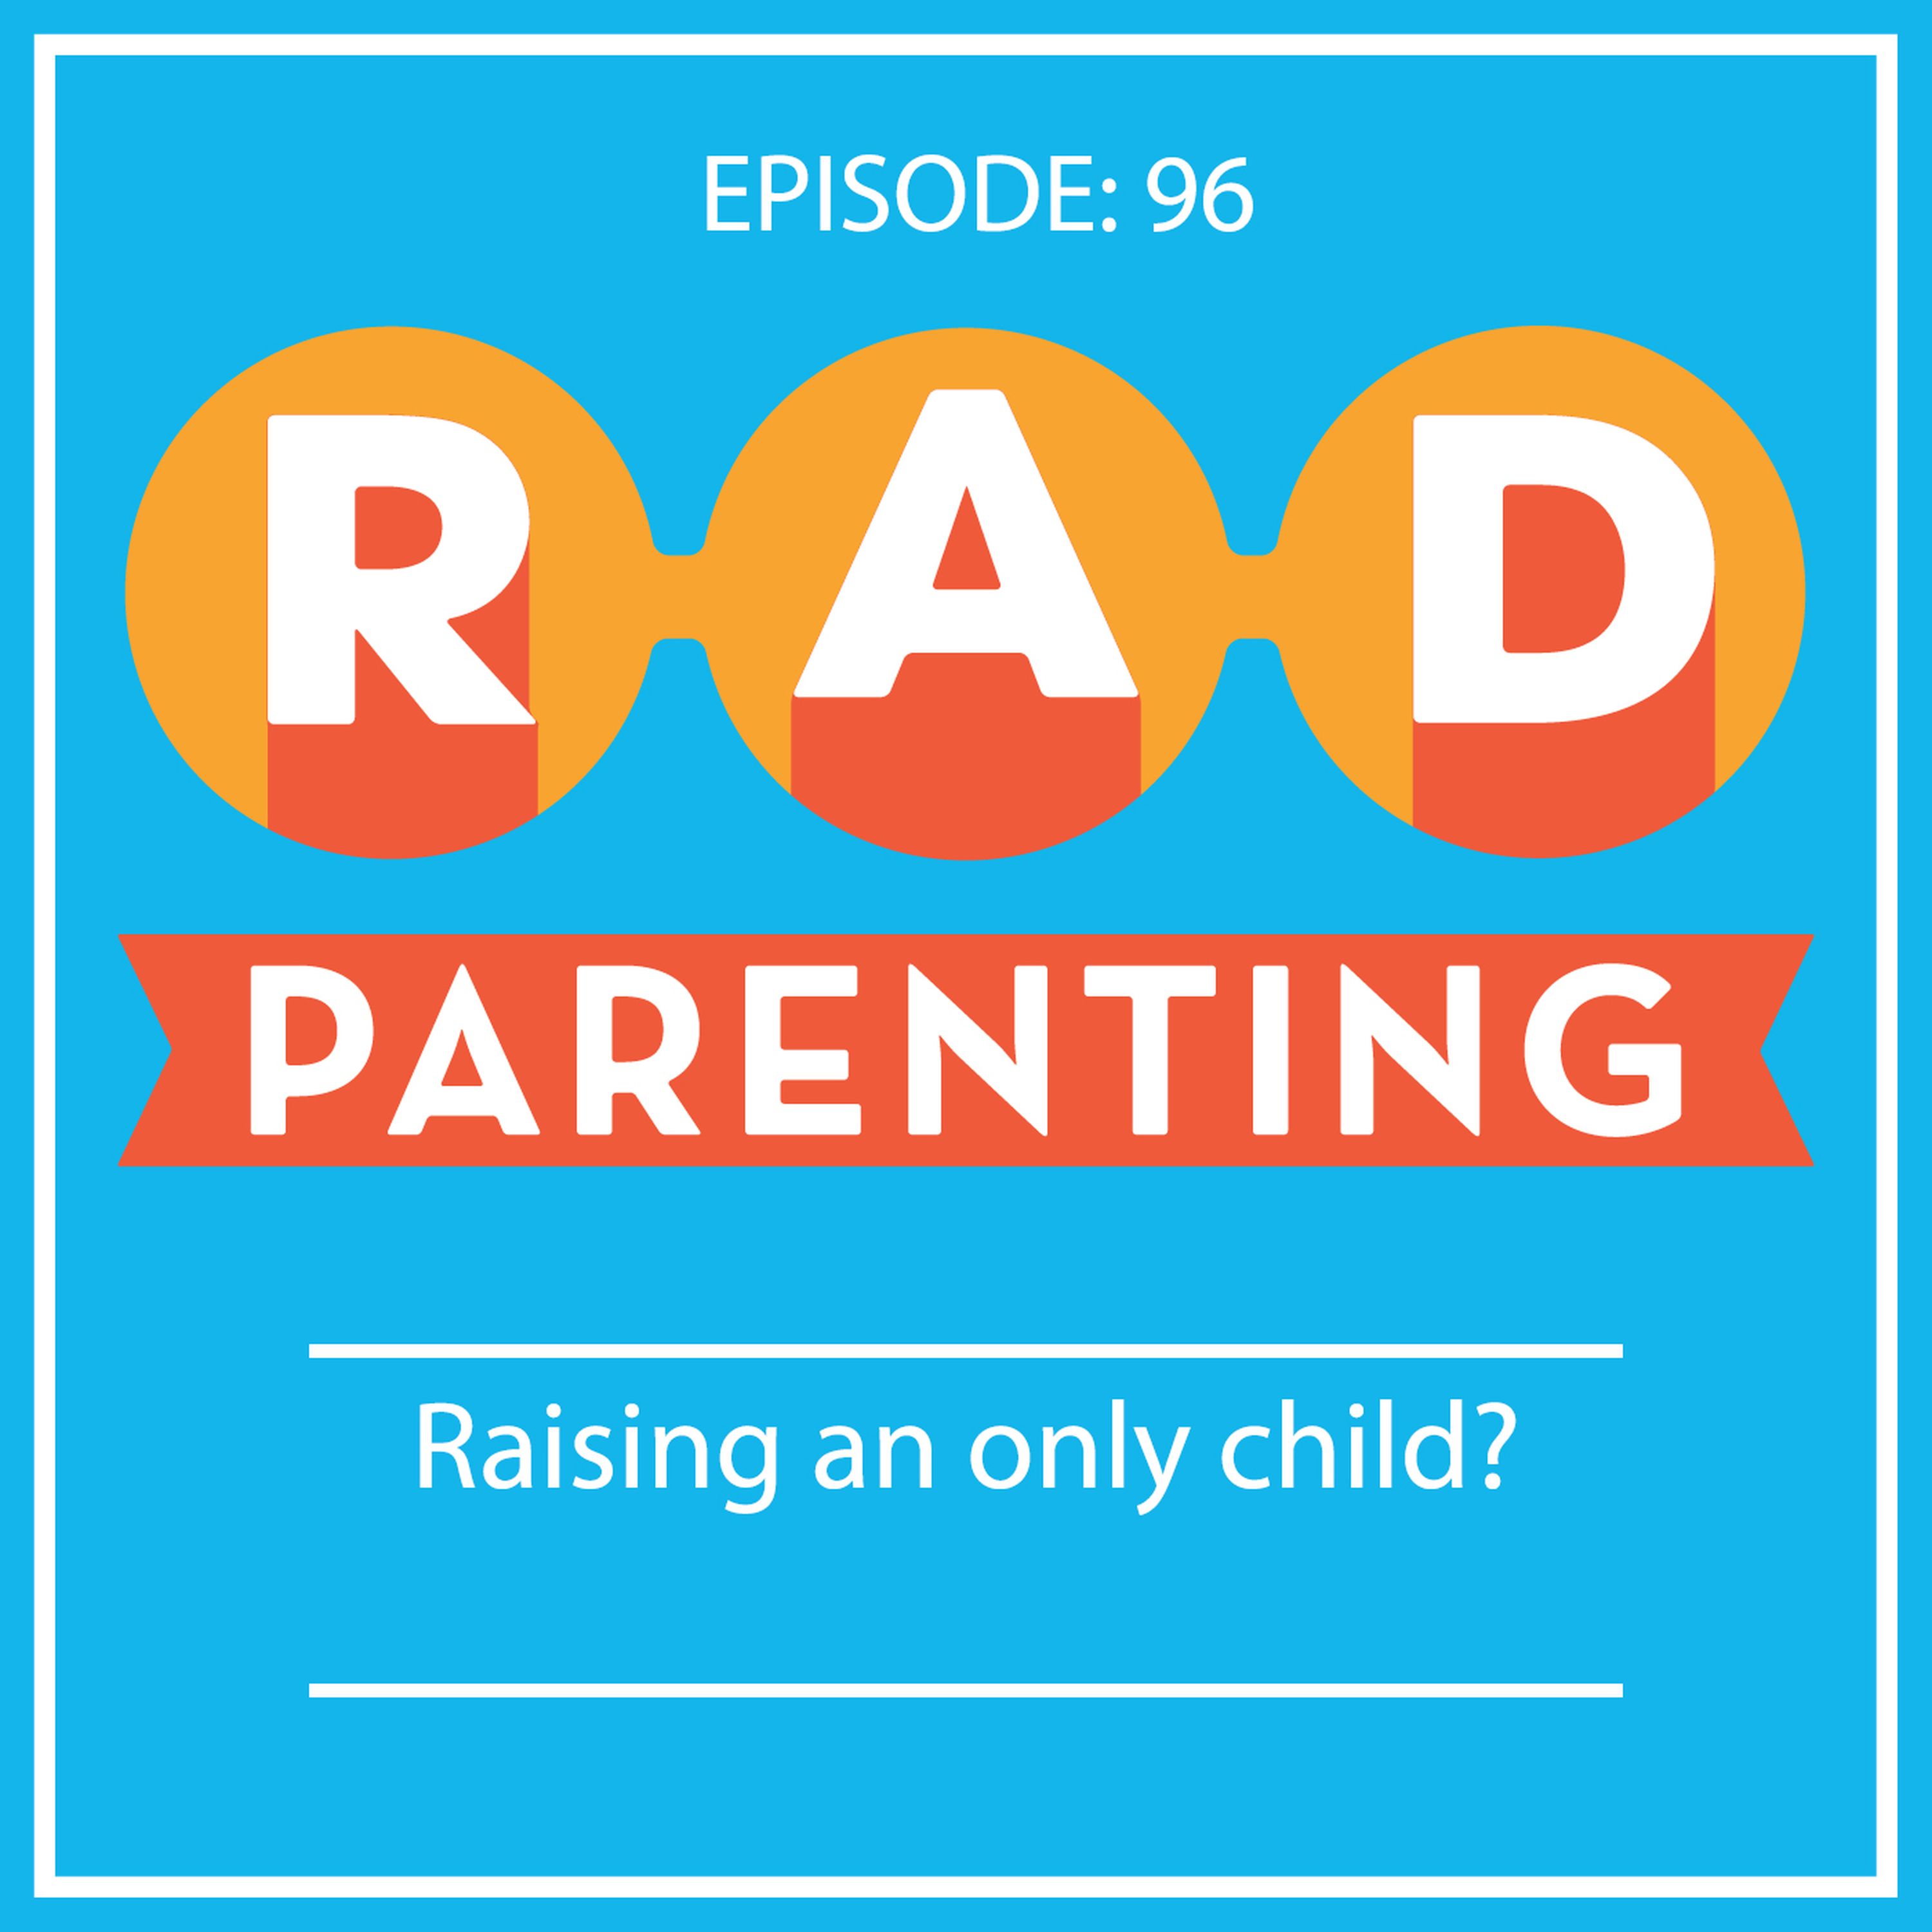 Raising an only child?